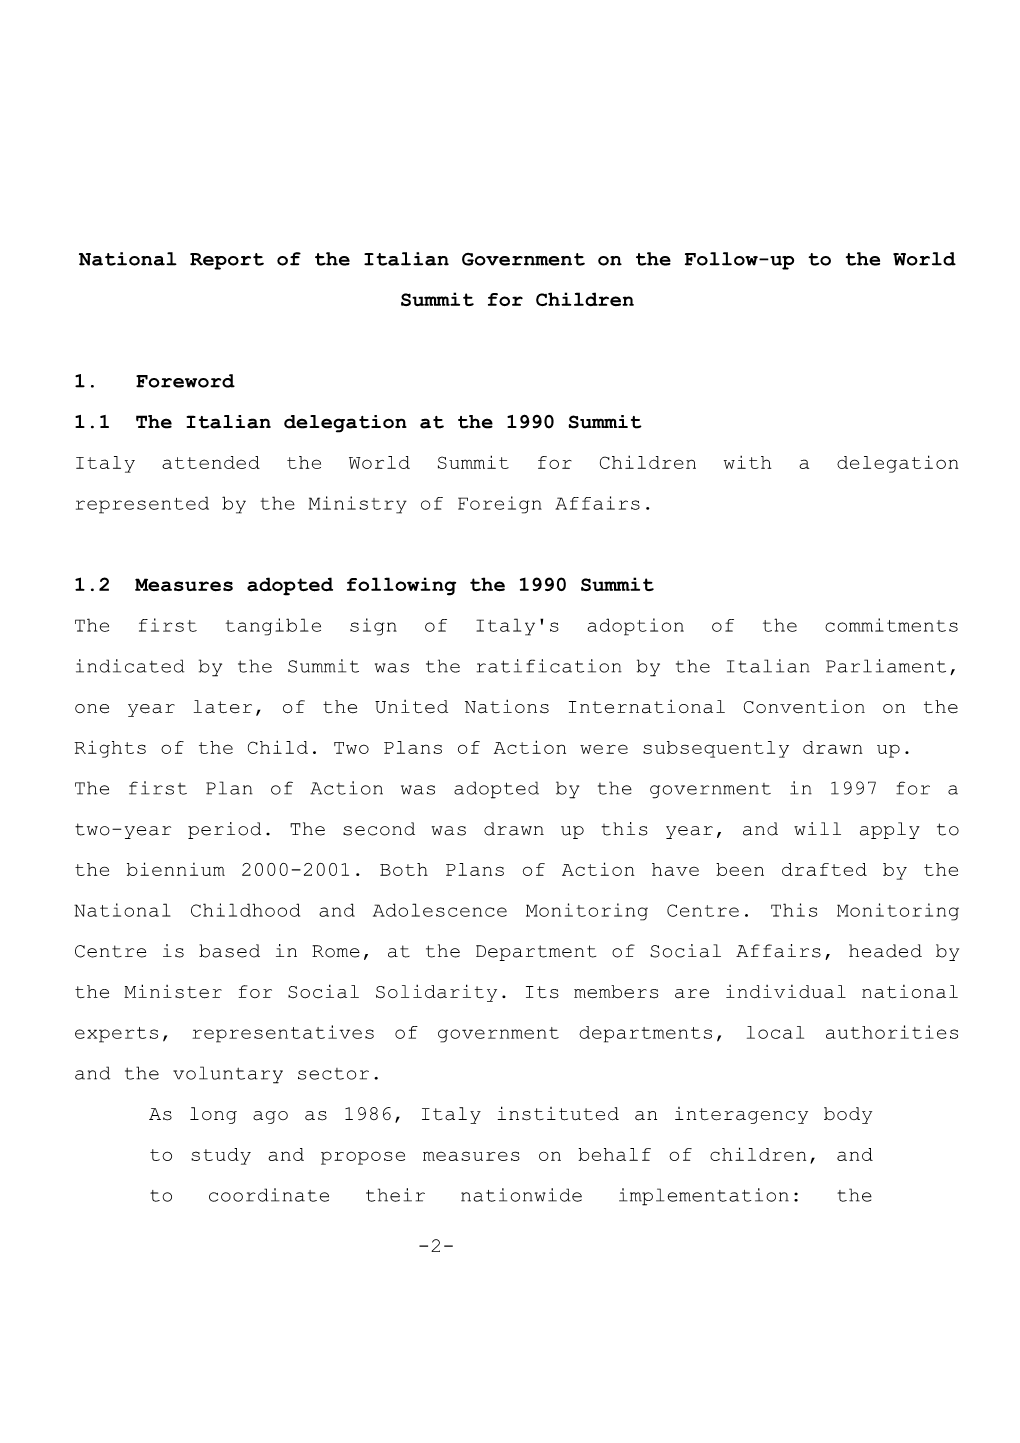 National Report of the Italian Government on the Follow-Up to the World Summit for Children